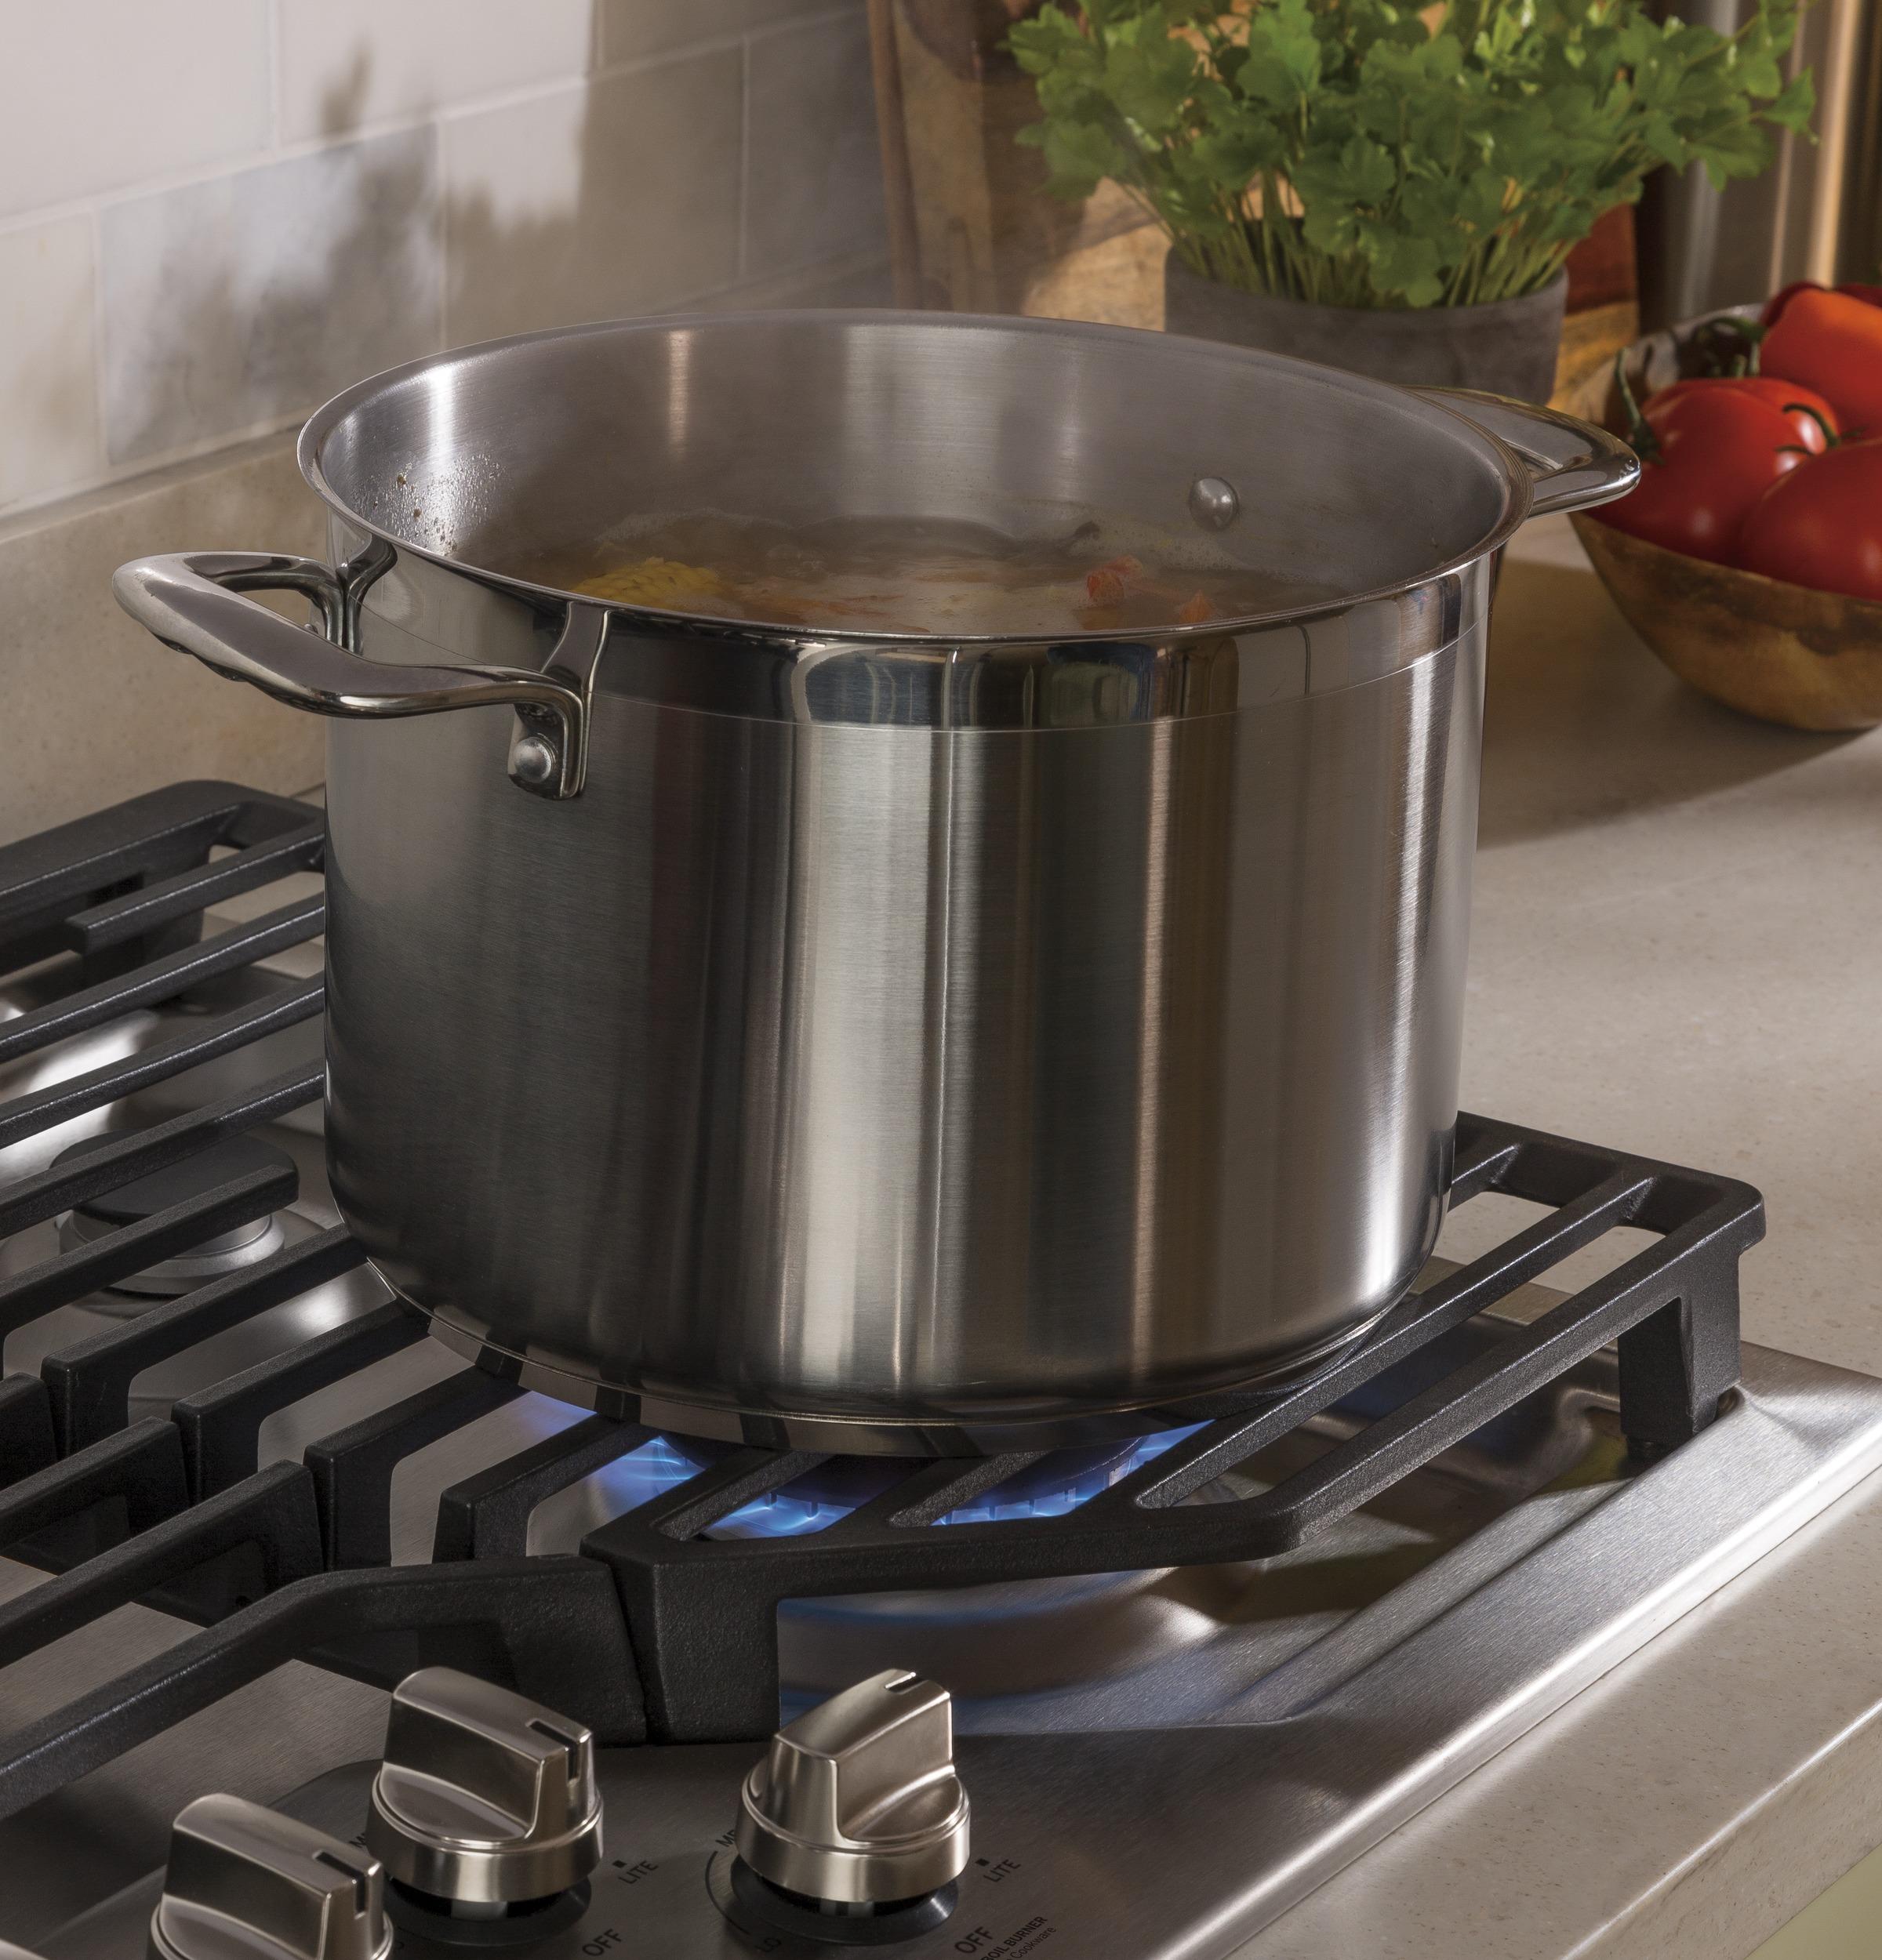 GE Profile™ 36" Built-In Gas Cooktop with Five Burners